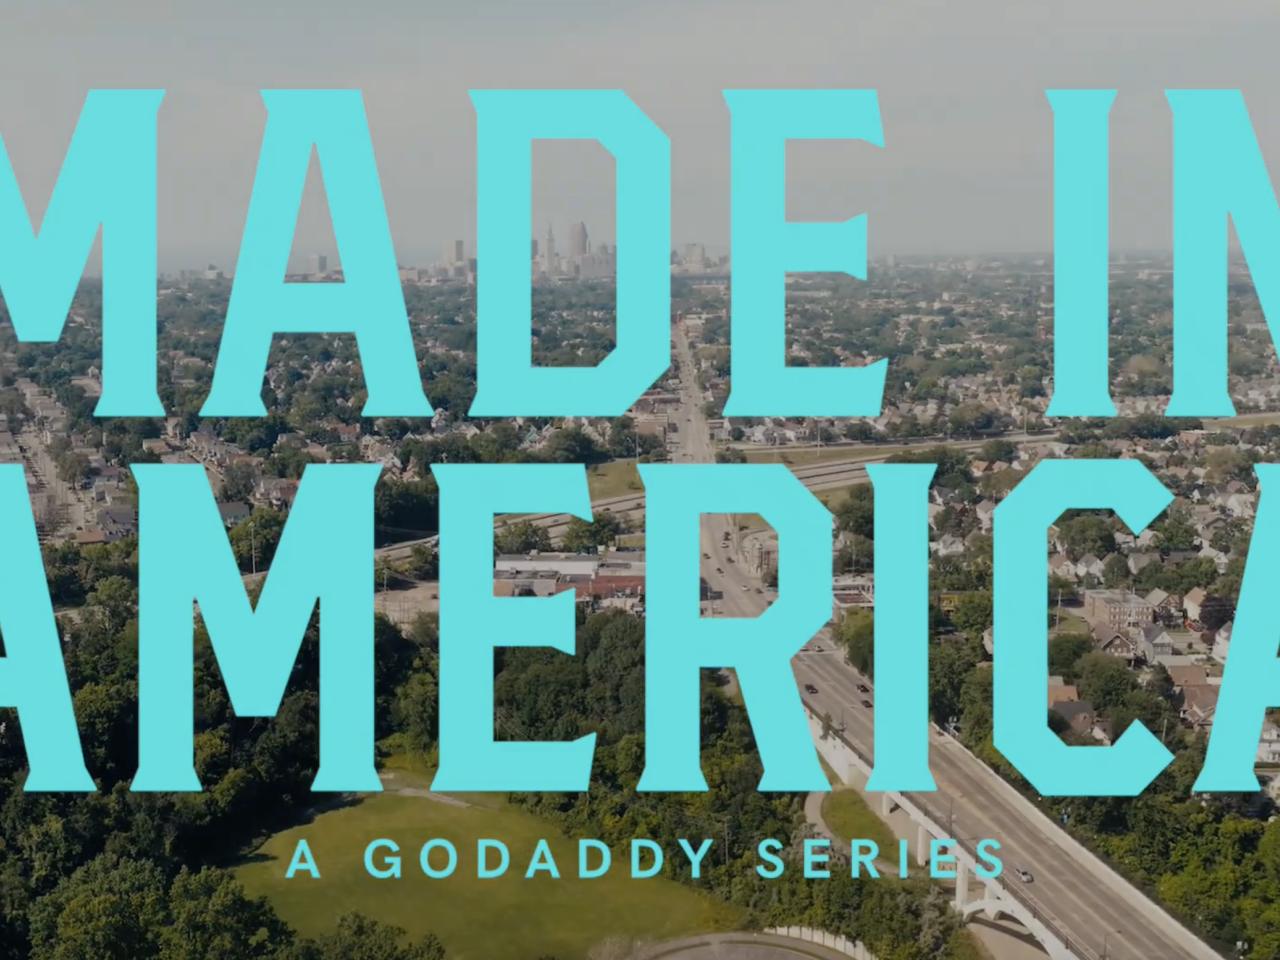 "Made in America: A GoDaddy Series"